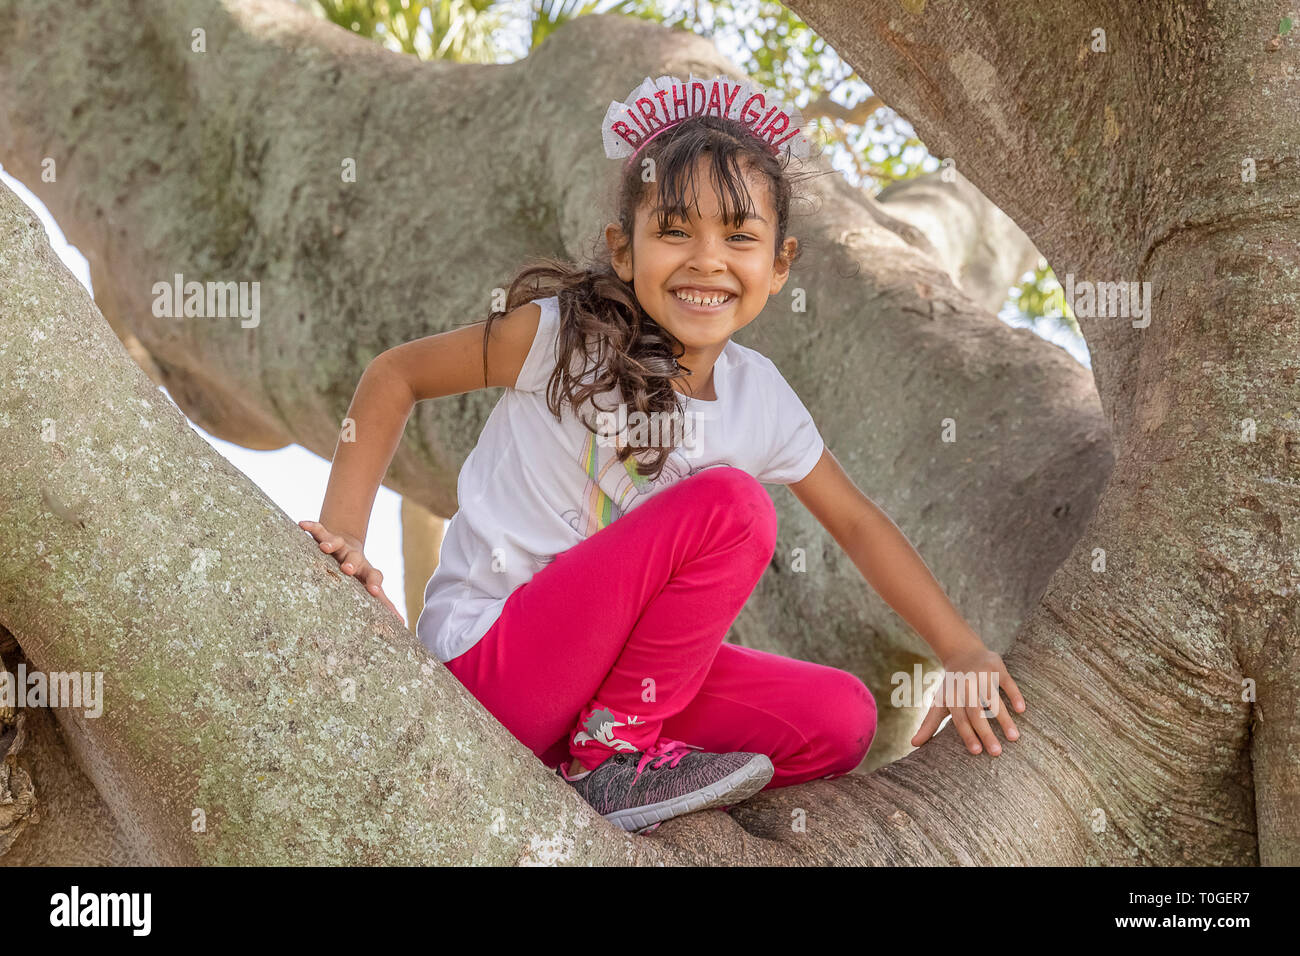 A happy birthday, the girl smiles from the top of the tree. She is so excited to reach the top of a large banyan tree on her birthday. Stock Photo